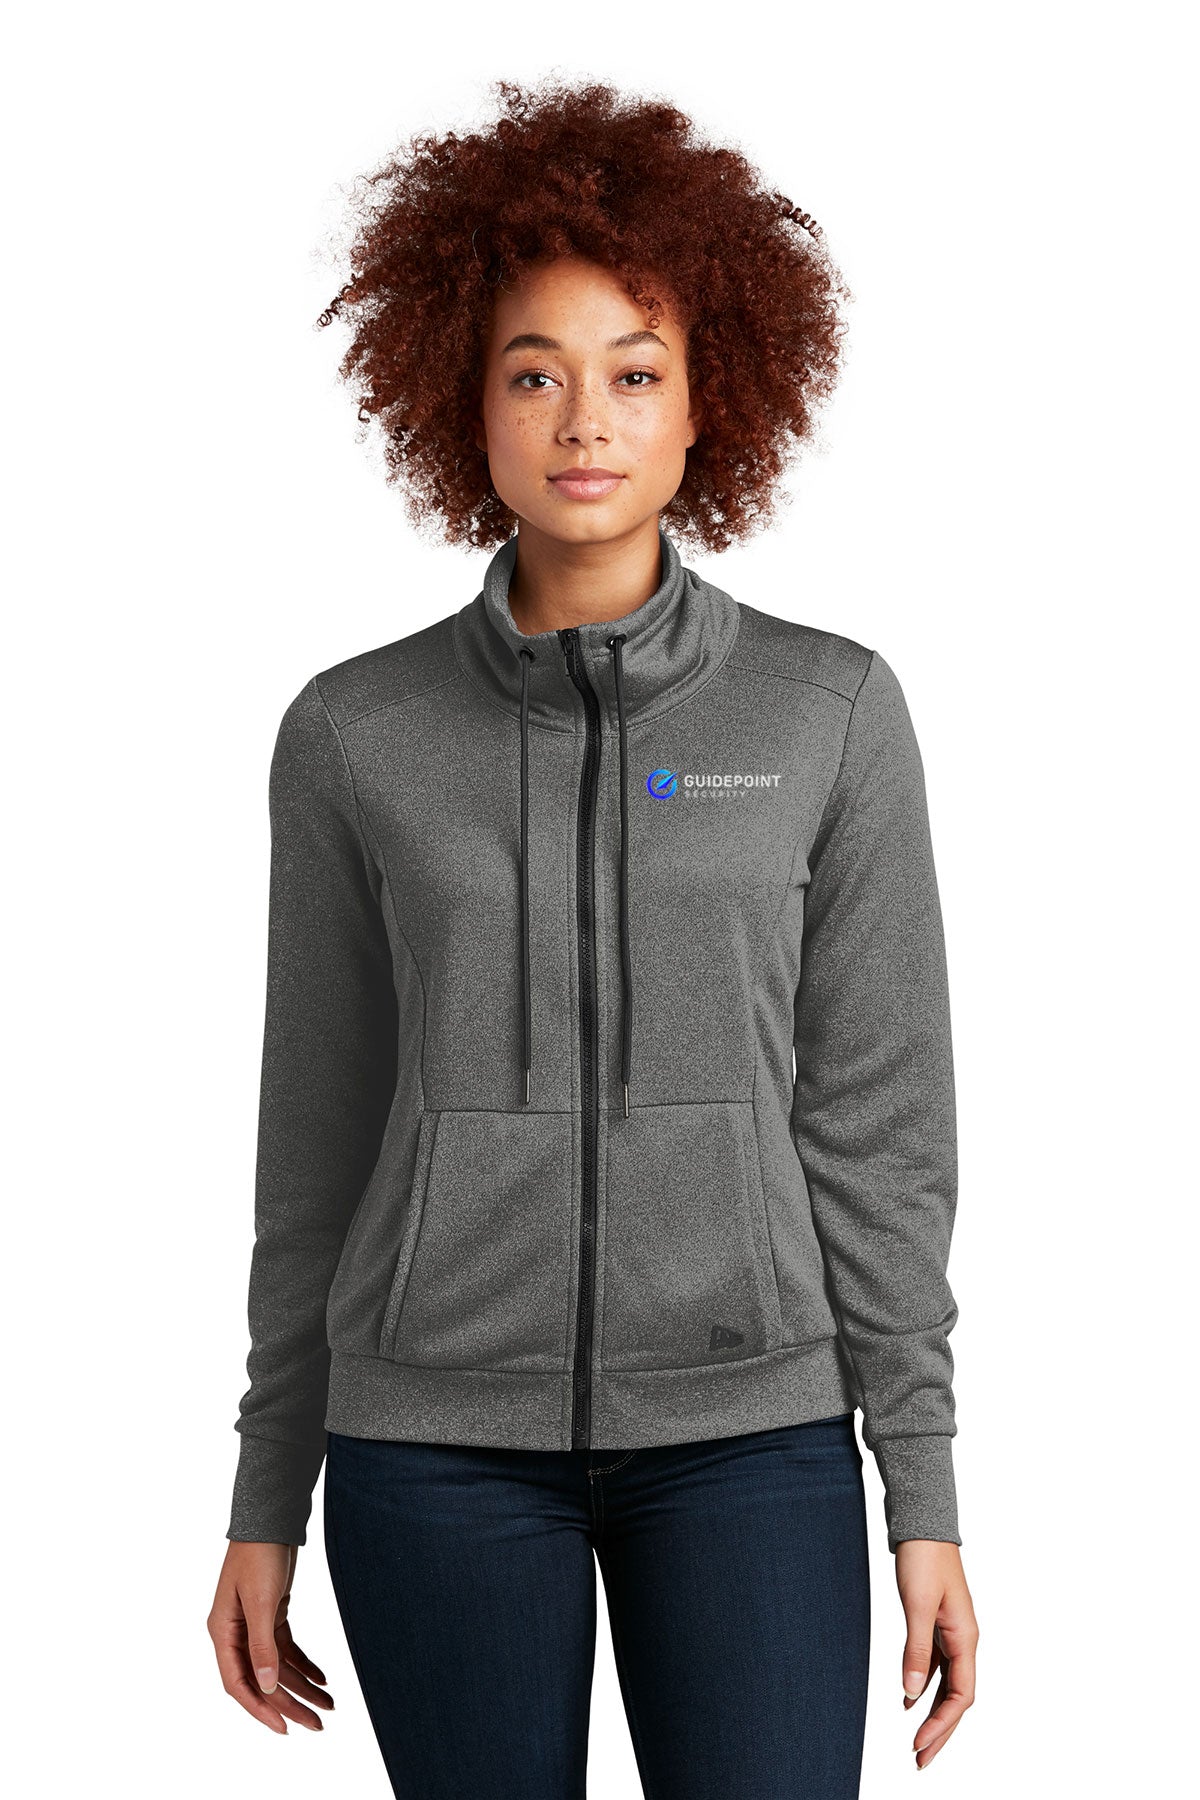 New Era Ladies Performance Terry Full-Zip Customized Jackets, Graphite Heather [GuidePoint Security]